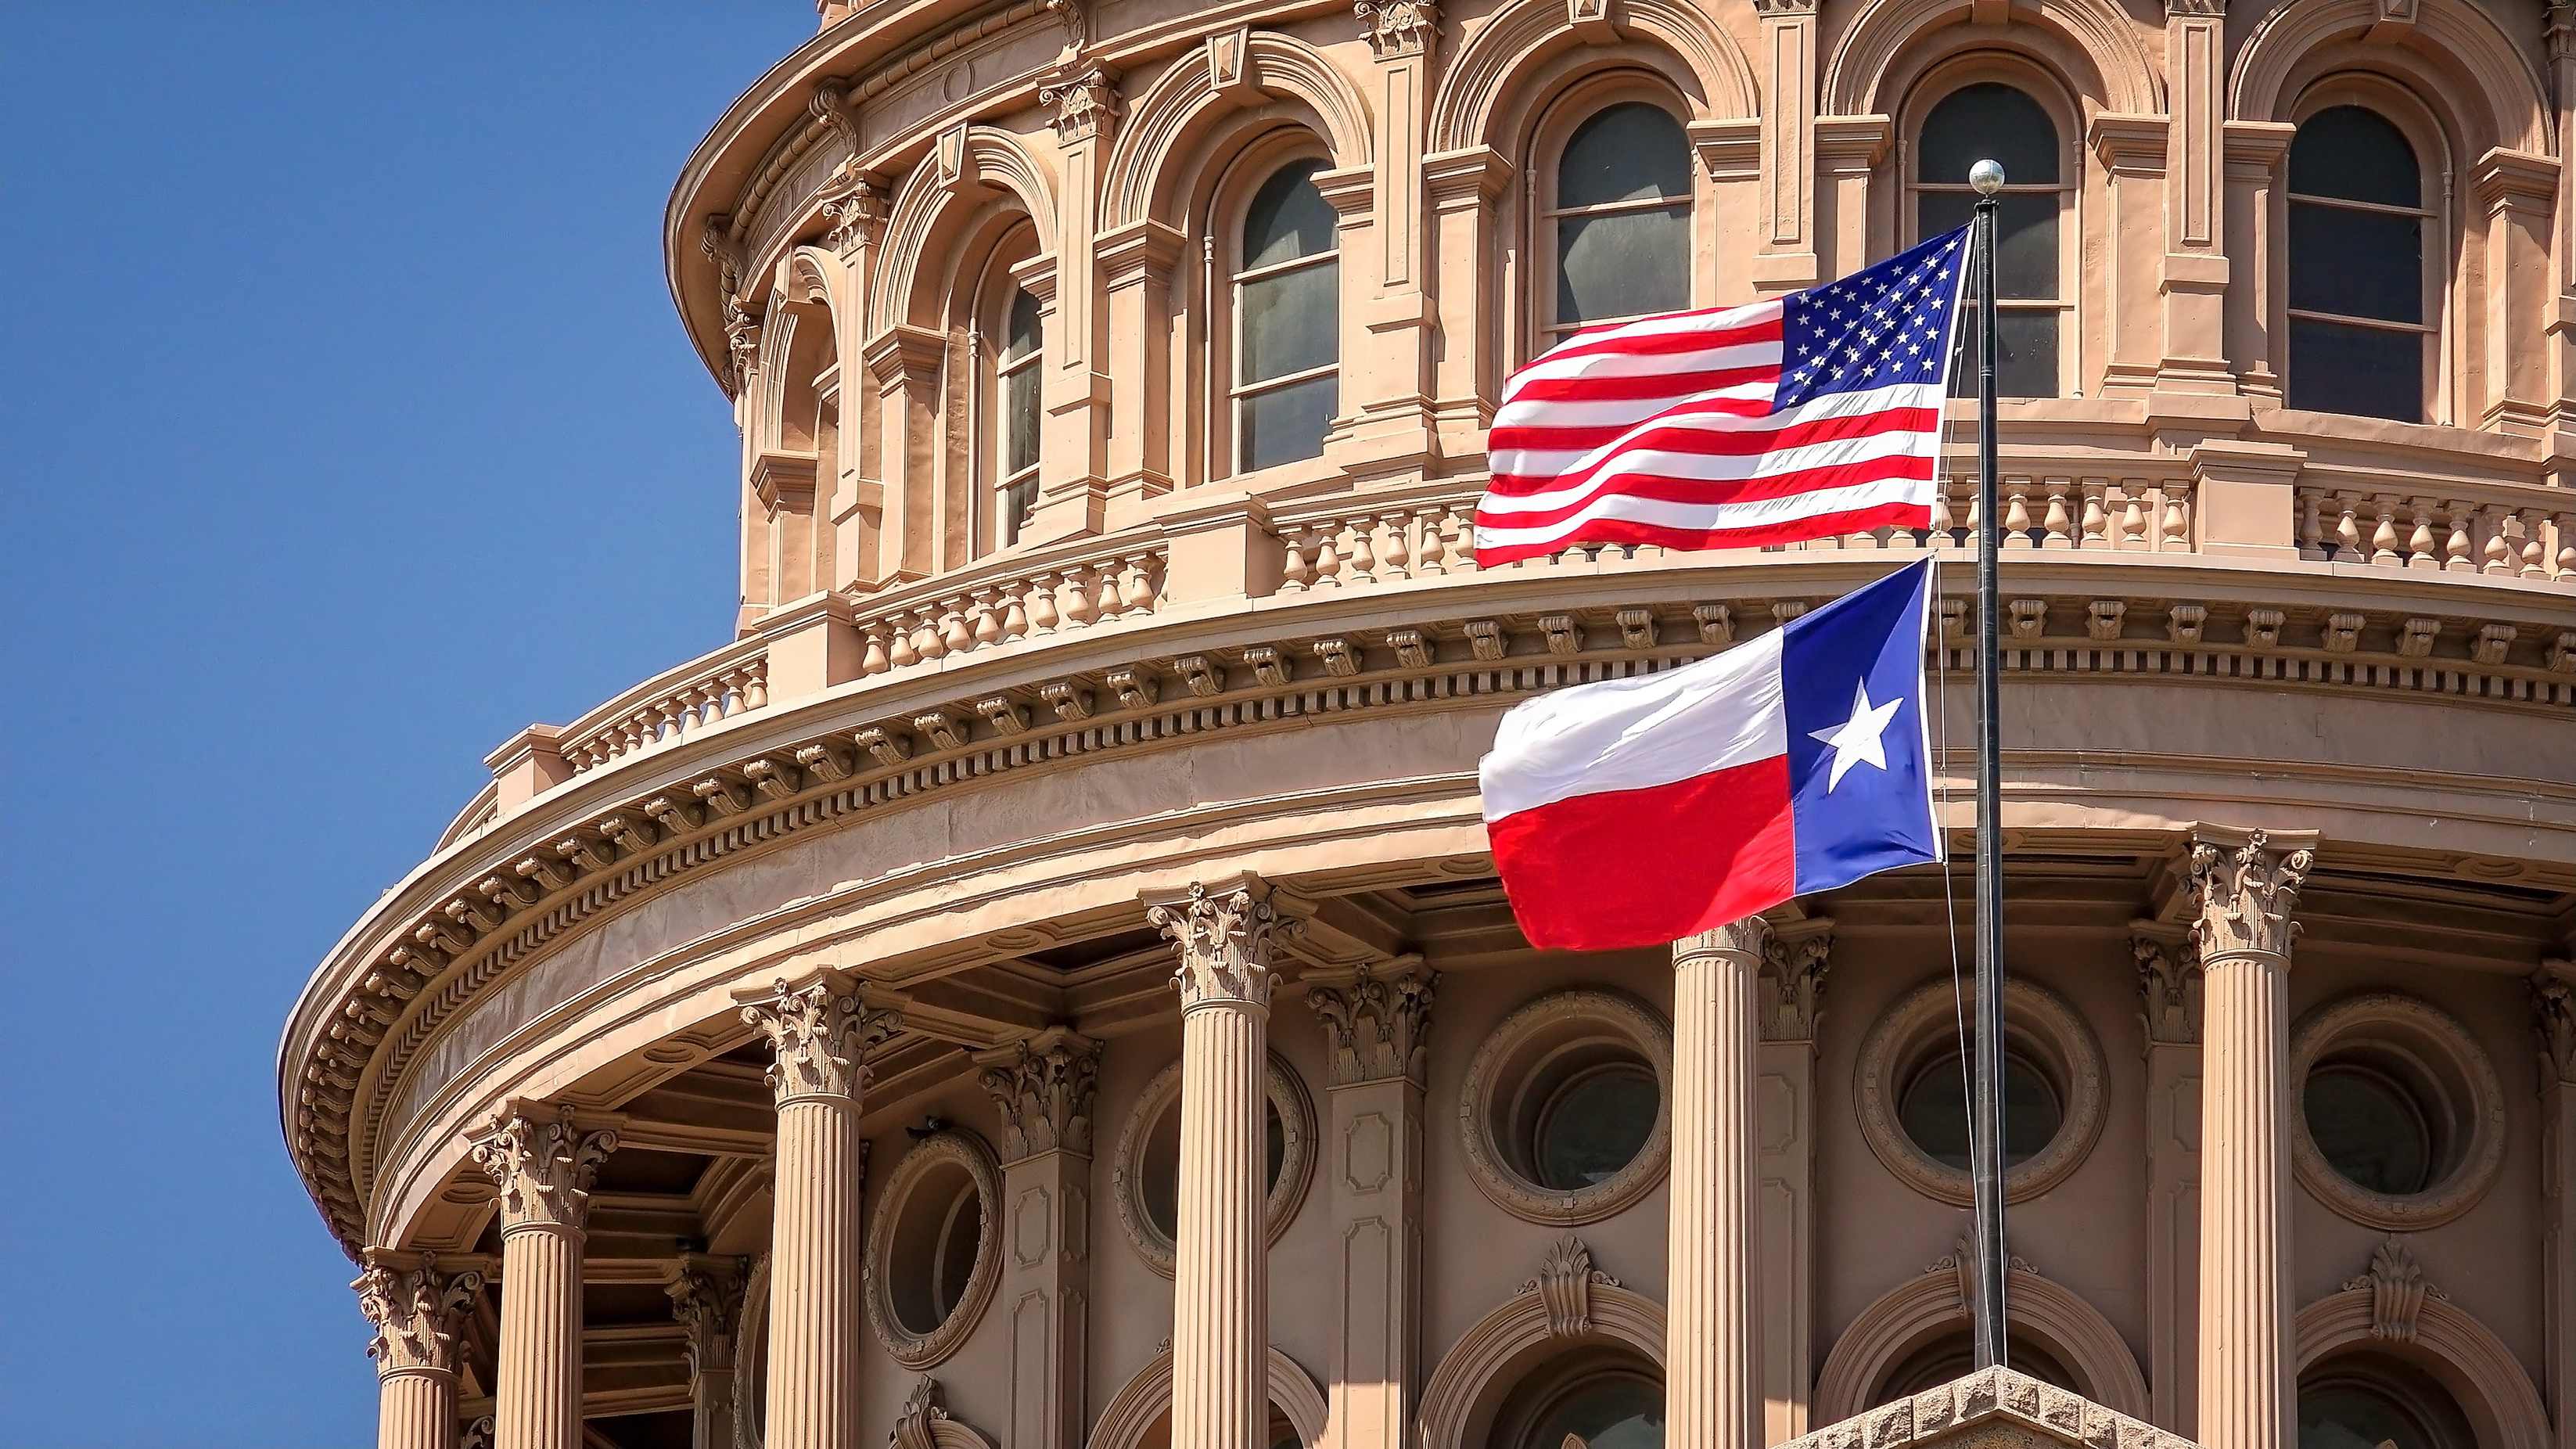 American and Texas state flags flying on the dome of the Texas State Capitol building in Austin [Shutterstock]